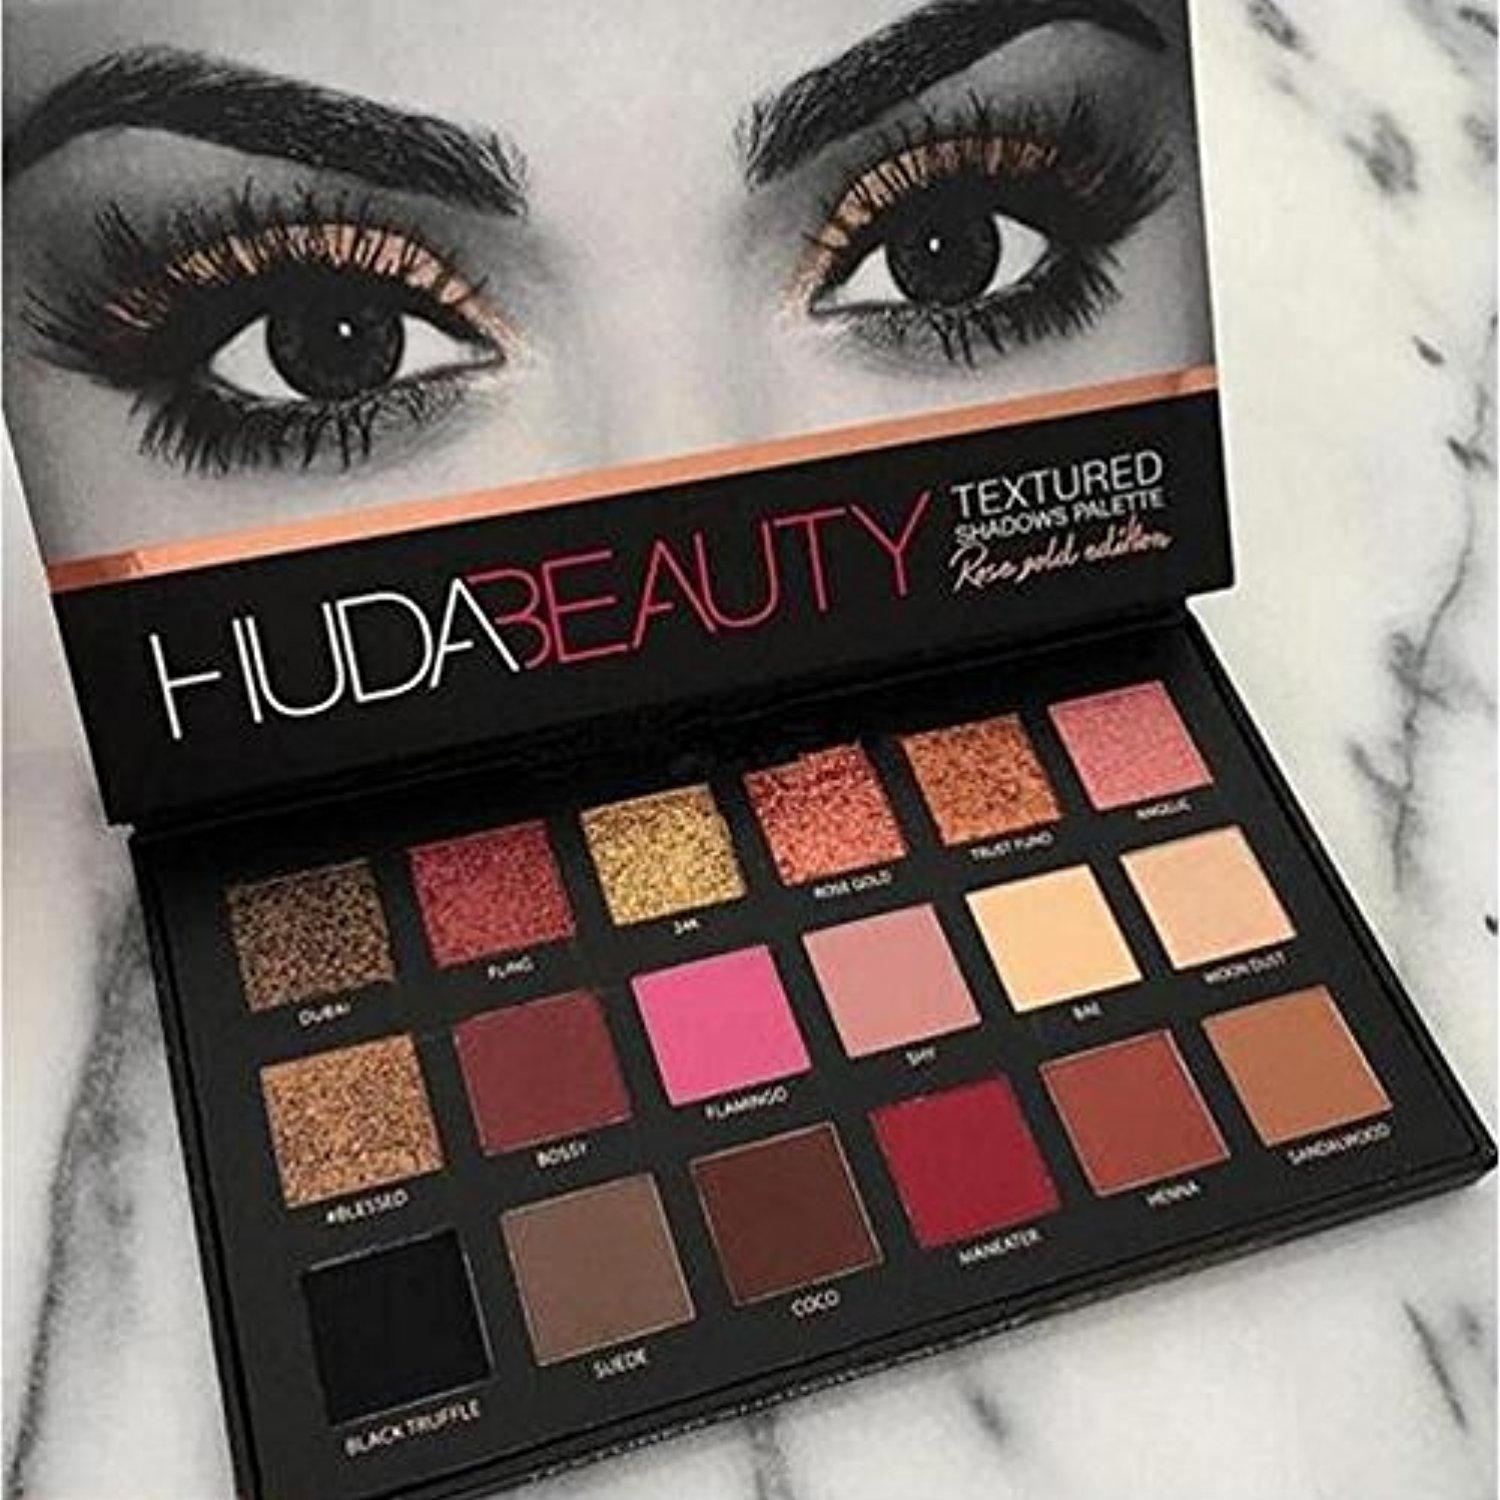 Huda beauty textured shadows palette rose gold edition